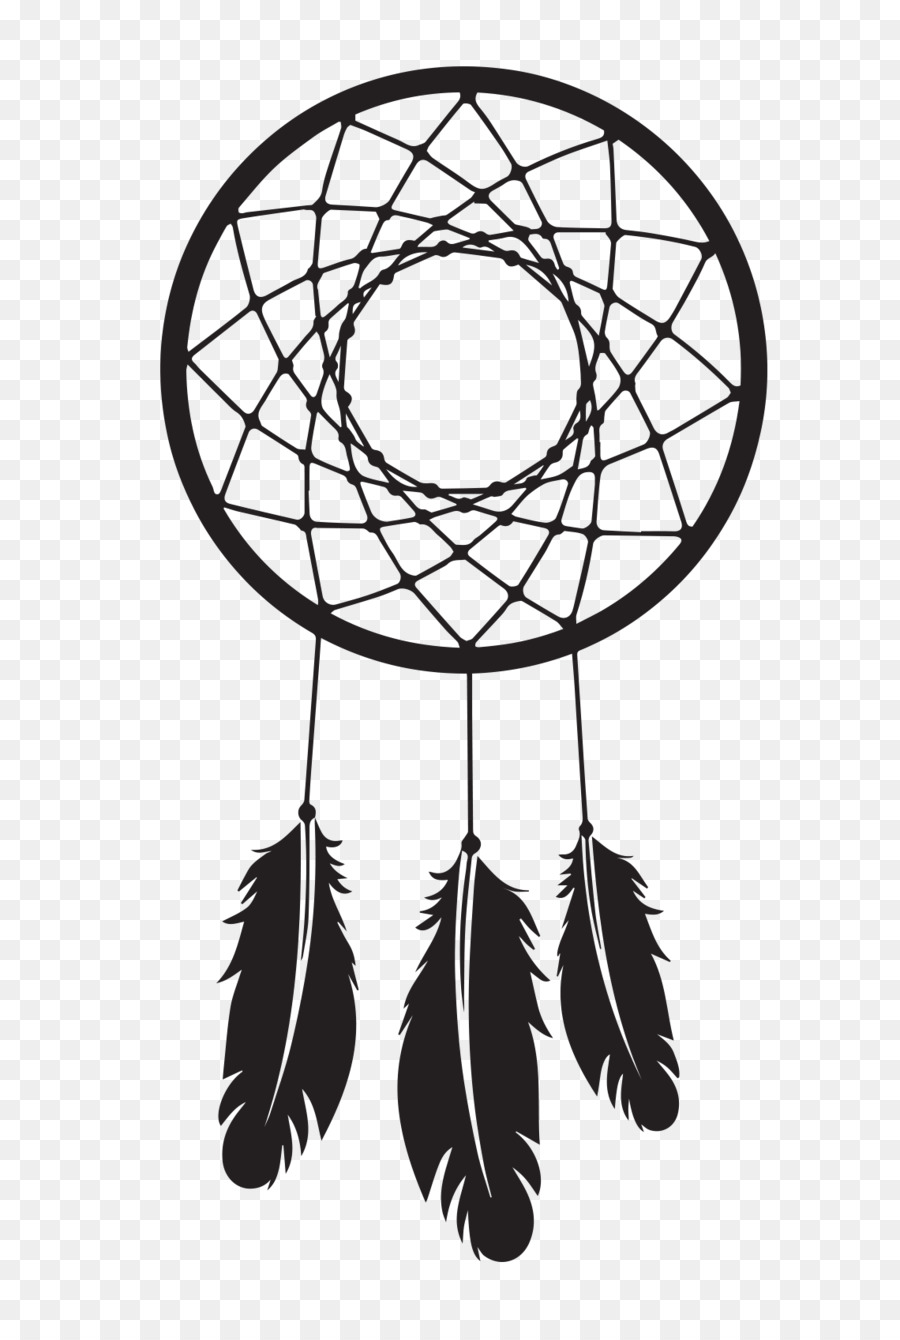 Dreamcatcher Royalty-free Stock photography Clip art - dream catcher png download - 1140*1674 - Free Transparent Dreamcatcher png Download.